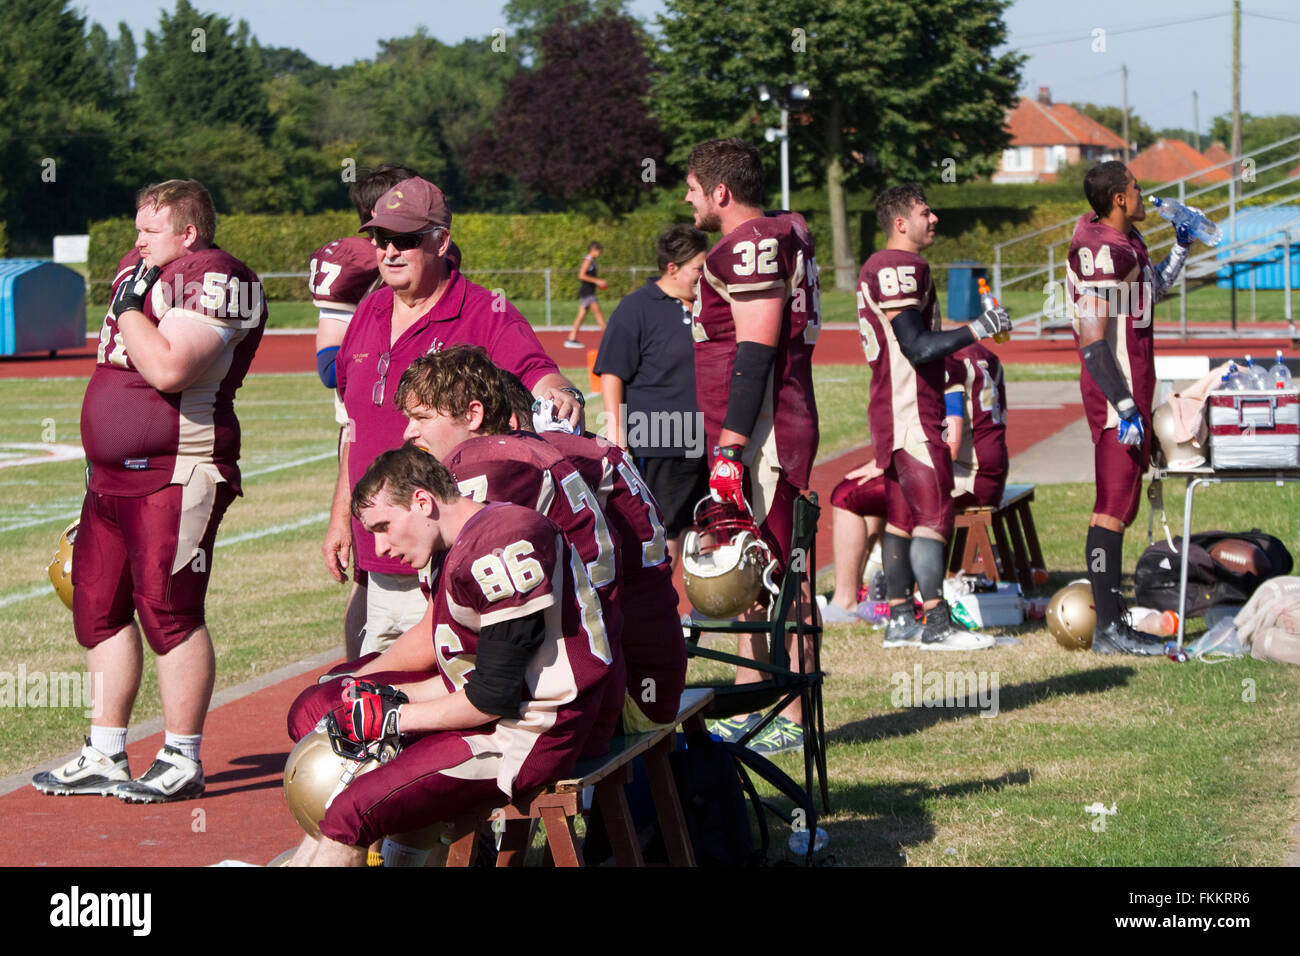 On a hot sunny day American football players and coach on the sideline Stock Photo